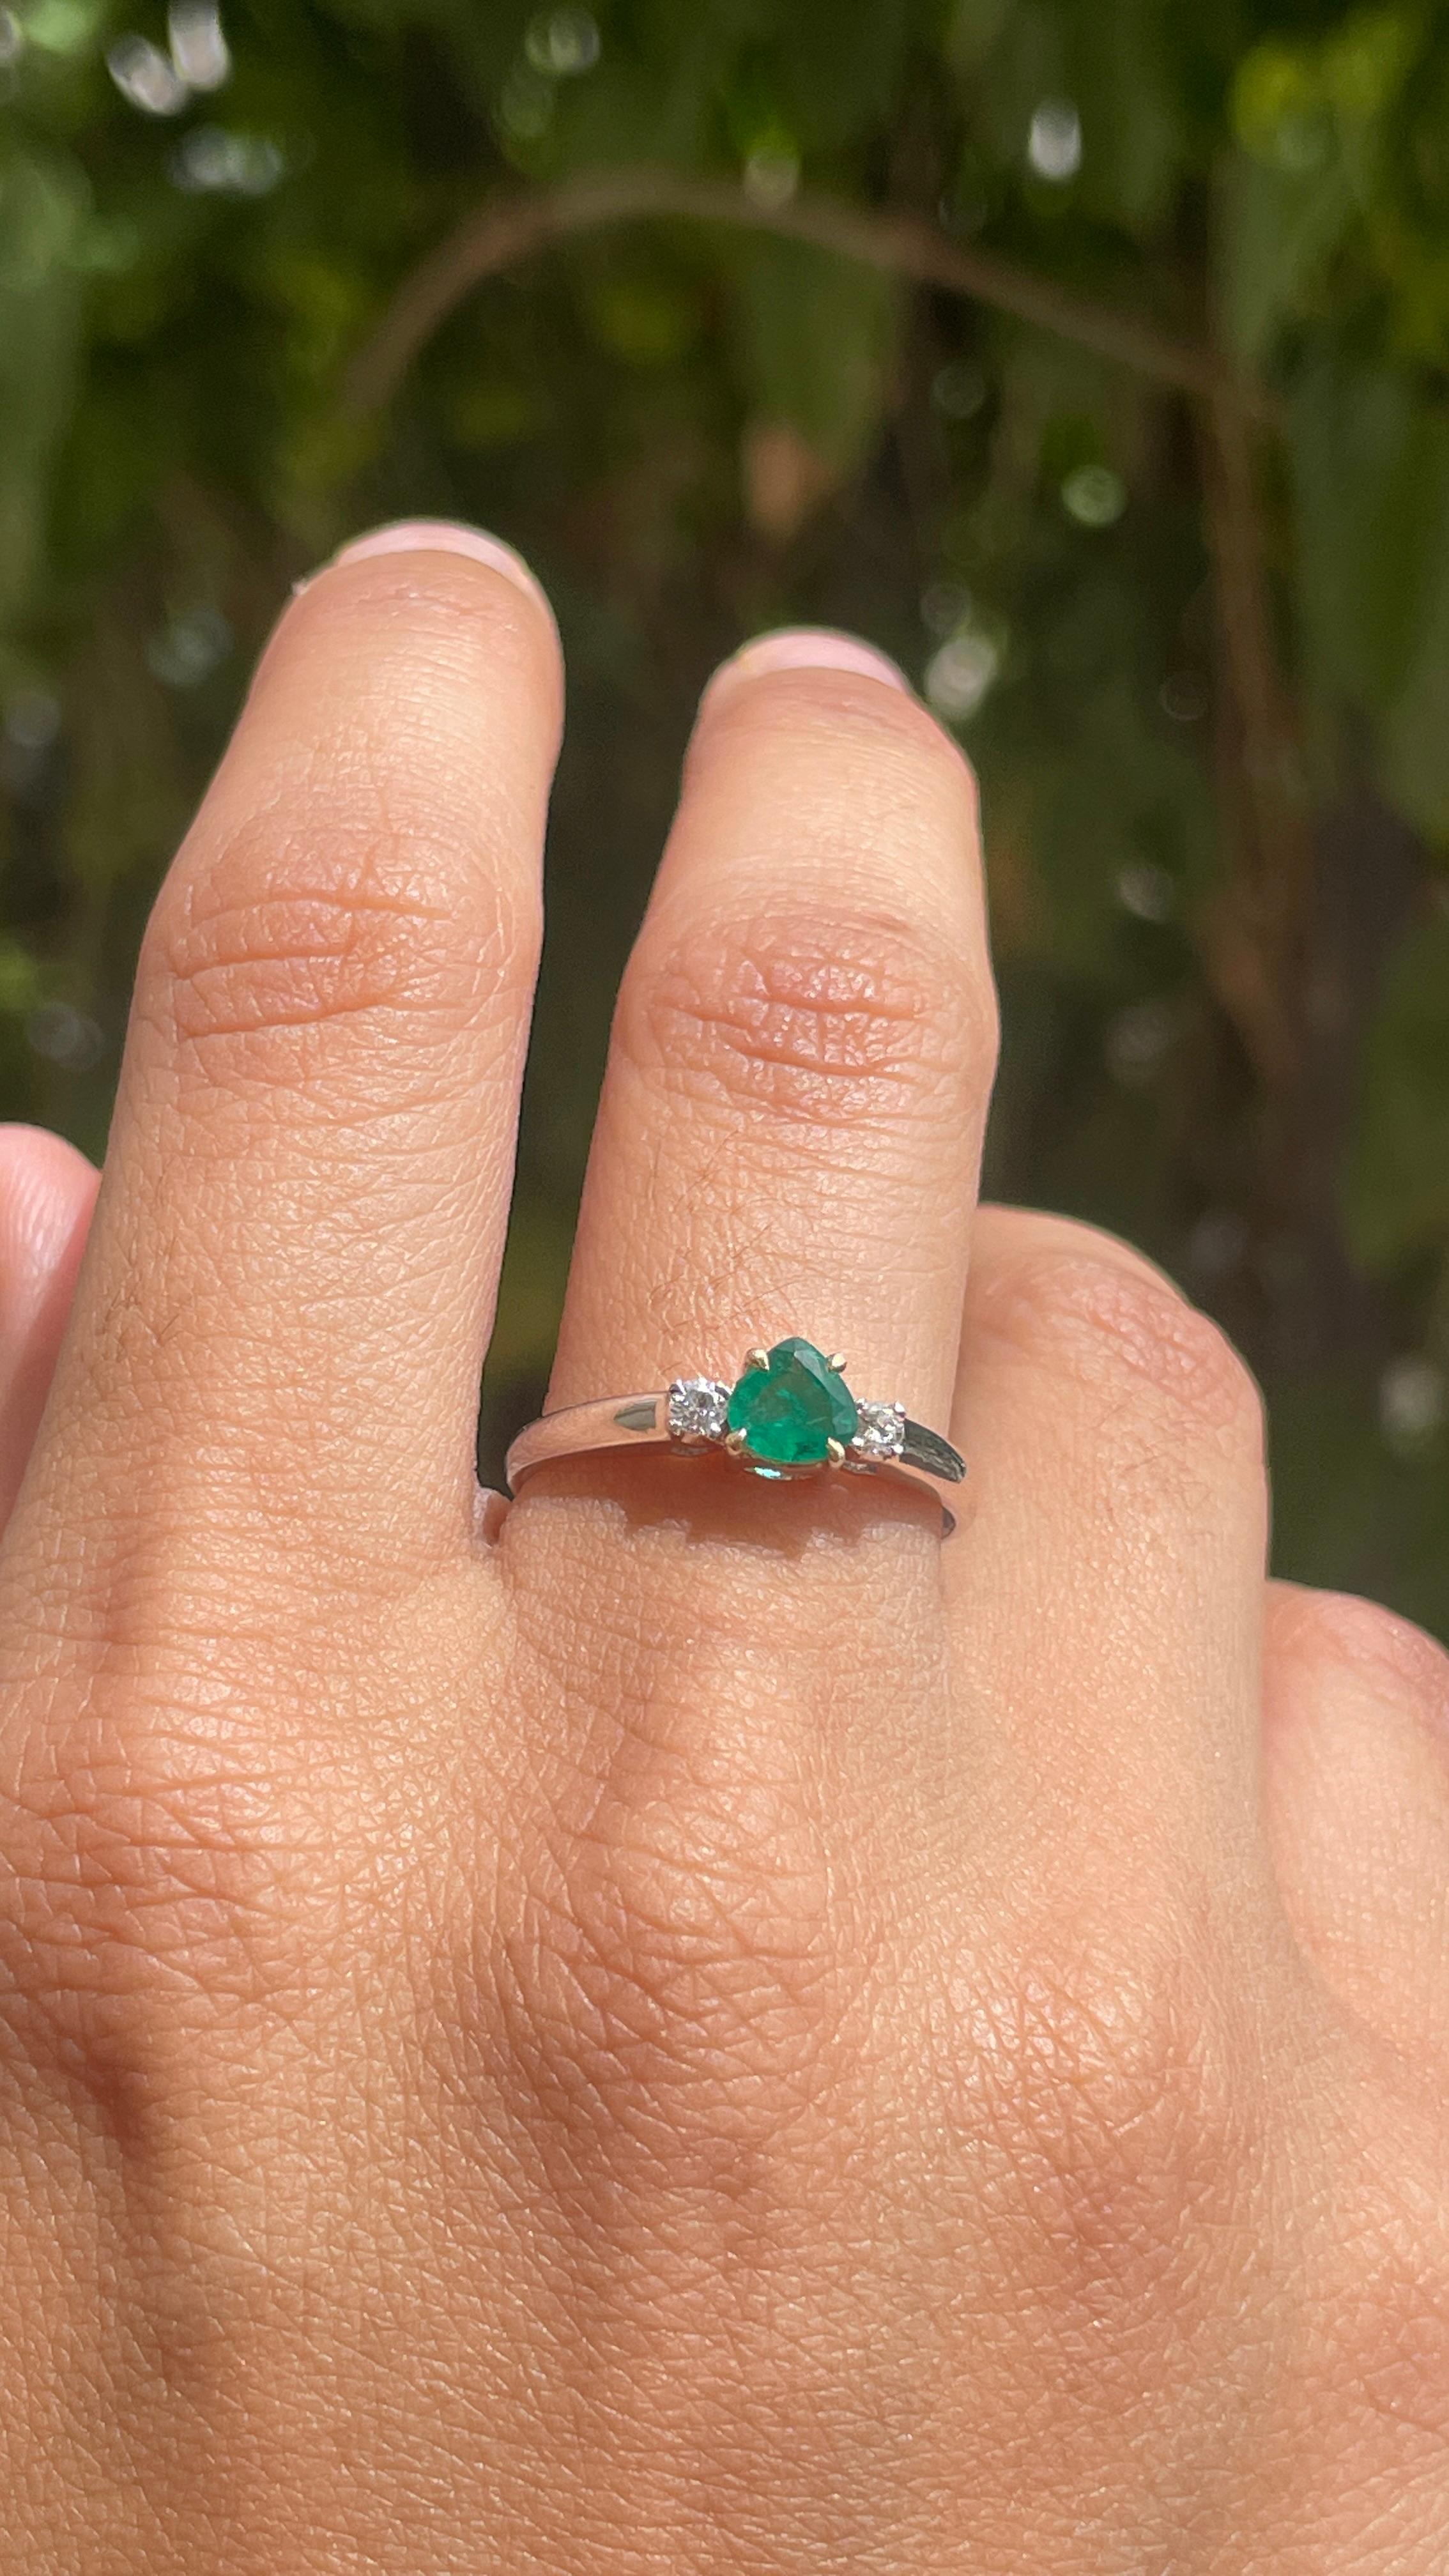 For Sale:  18k Solid White Gold Emerald Ring with Diamonds 9